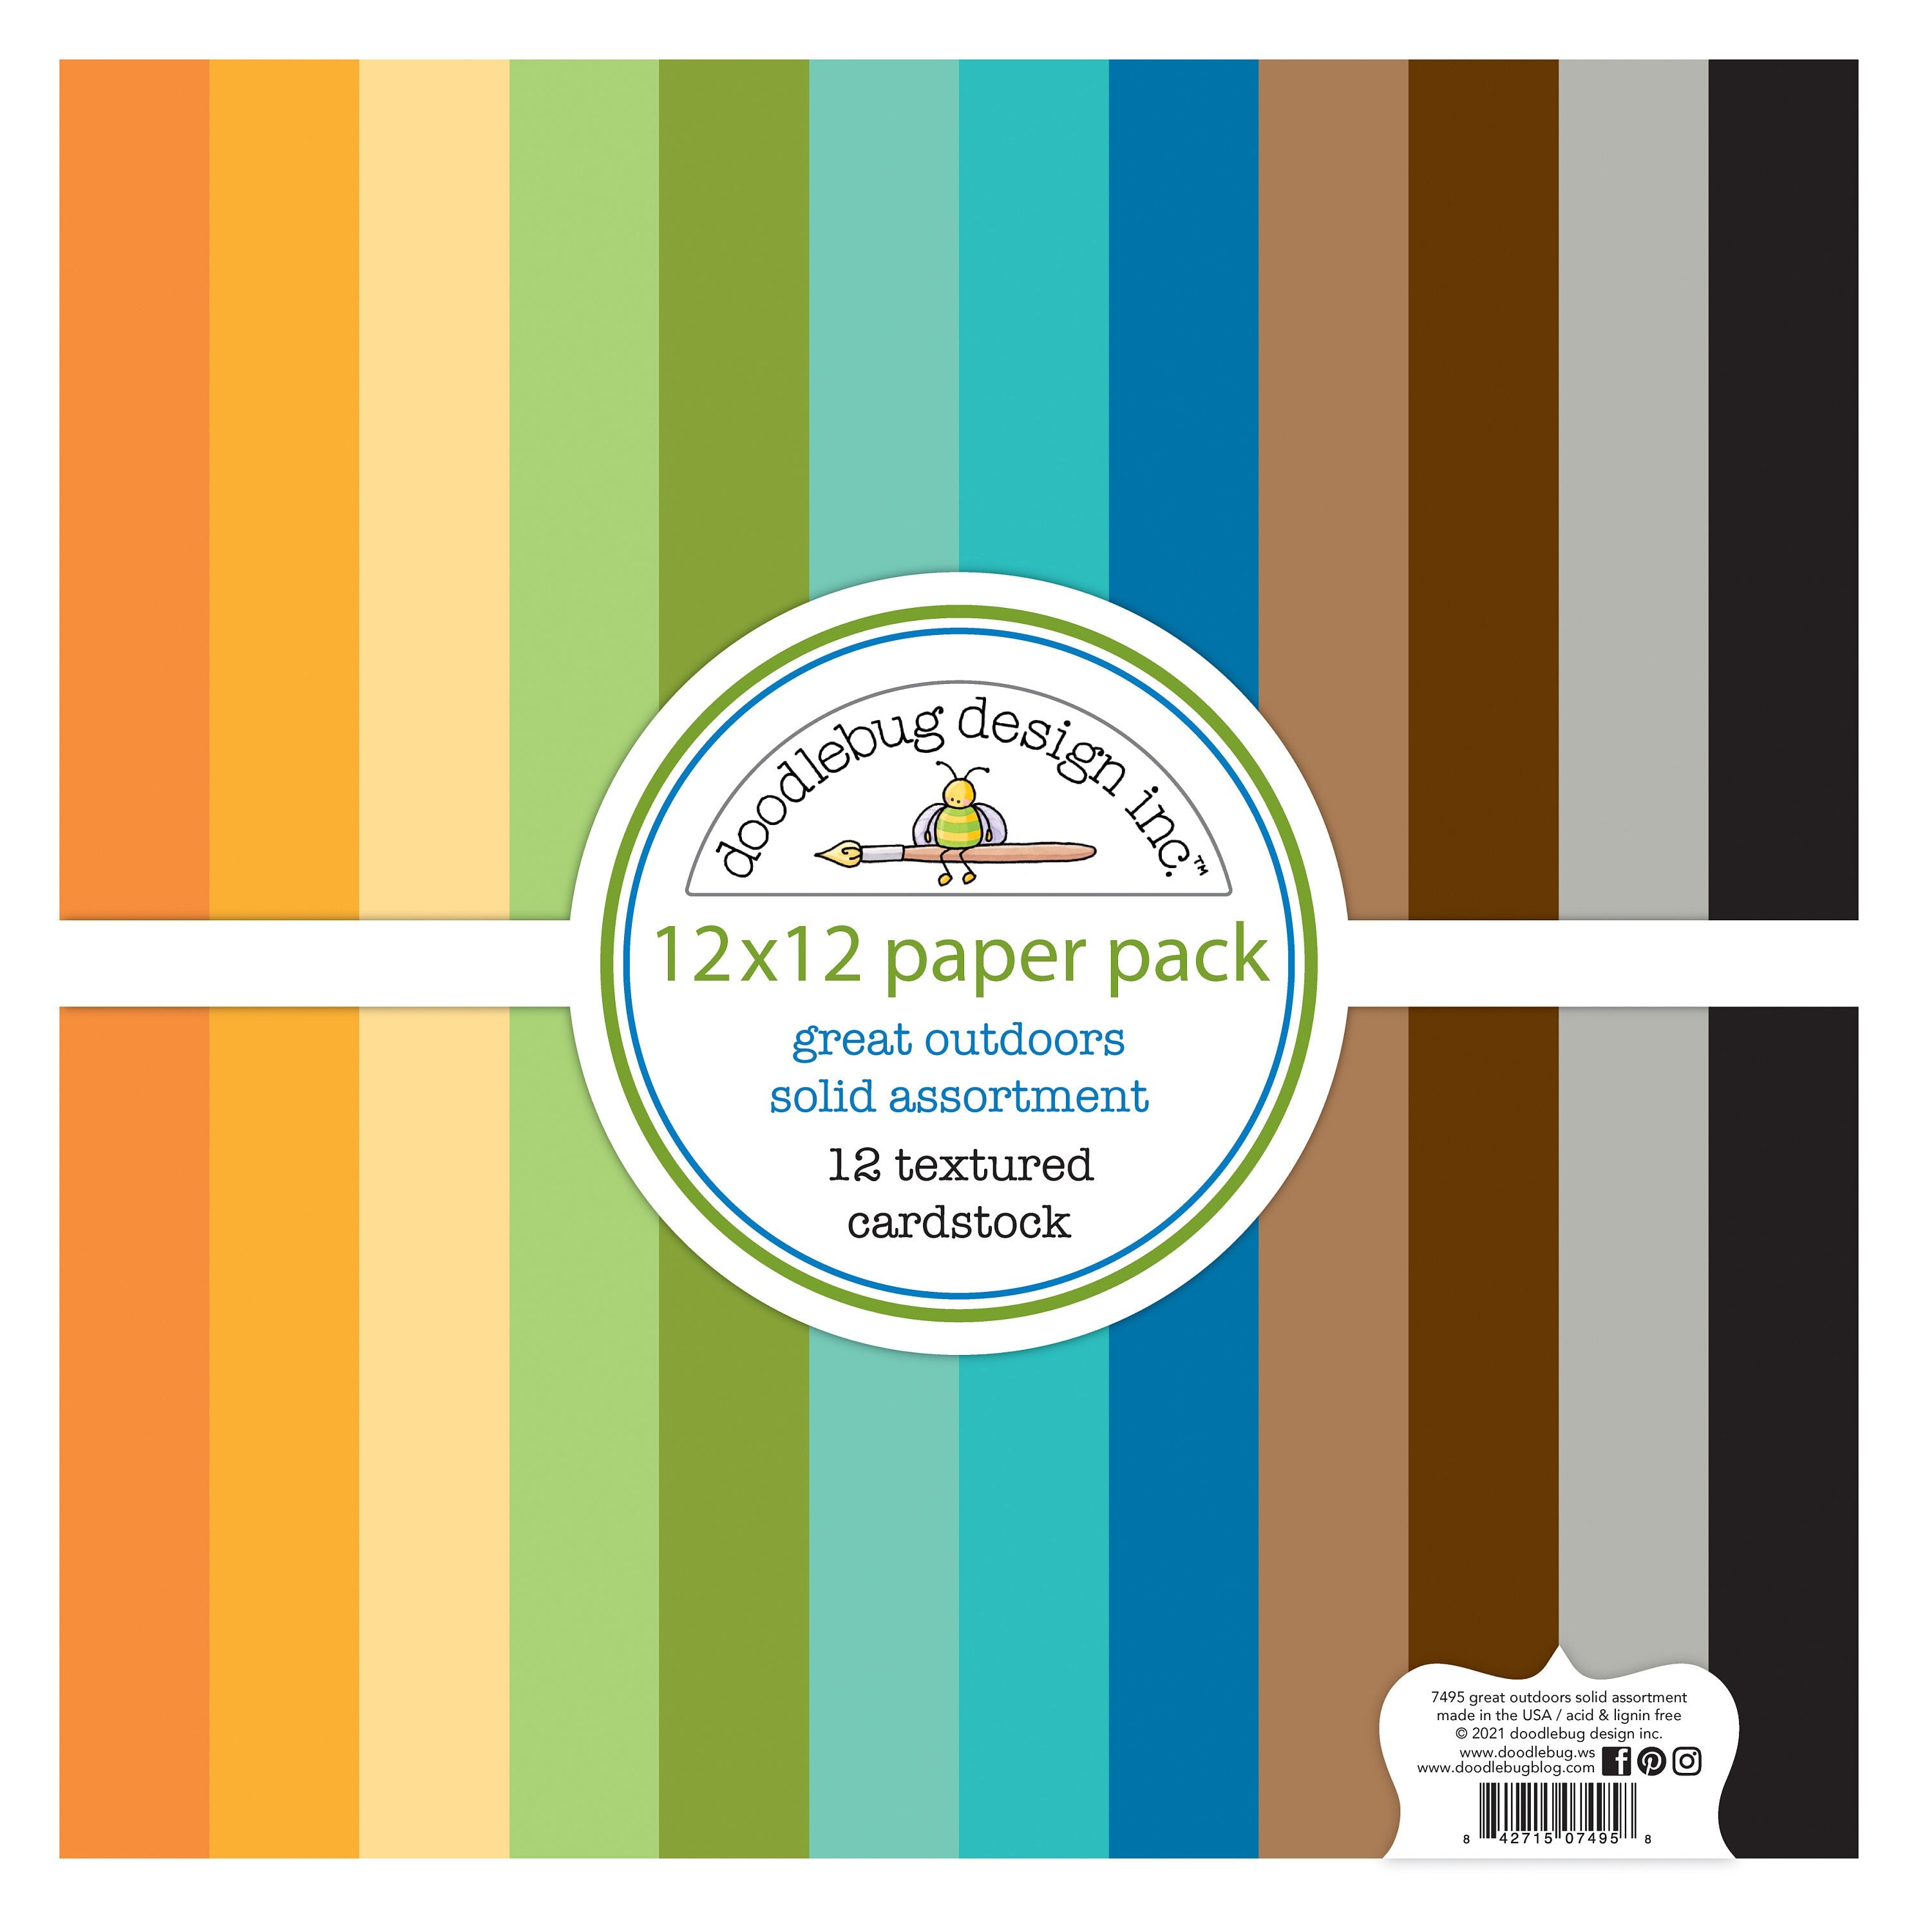 Bazzill: Citrus Slice Cardstock Paper 12x12 Two-sided Scrapbook Paper 